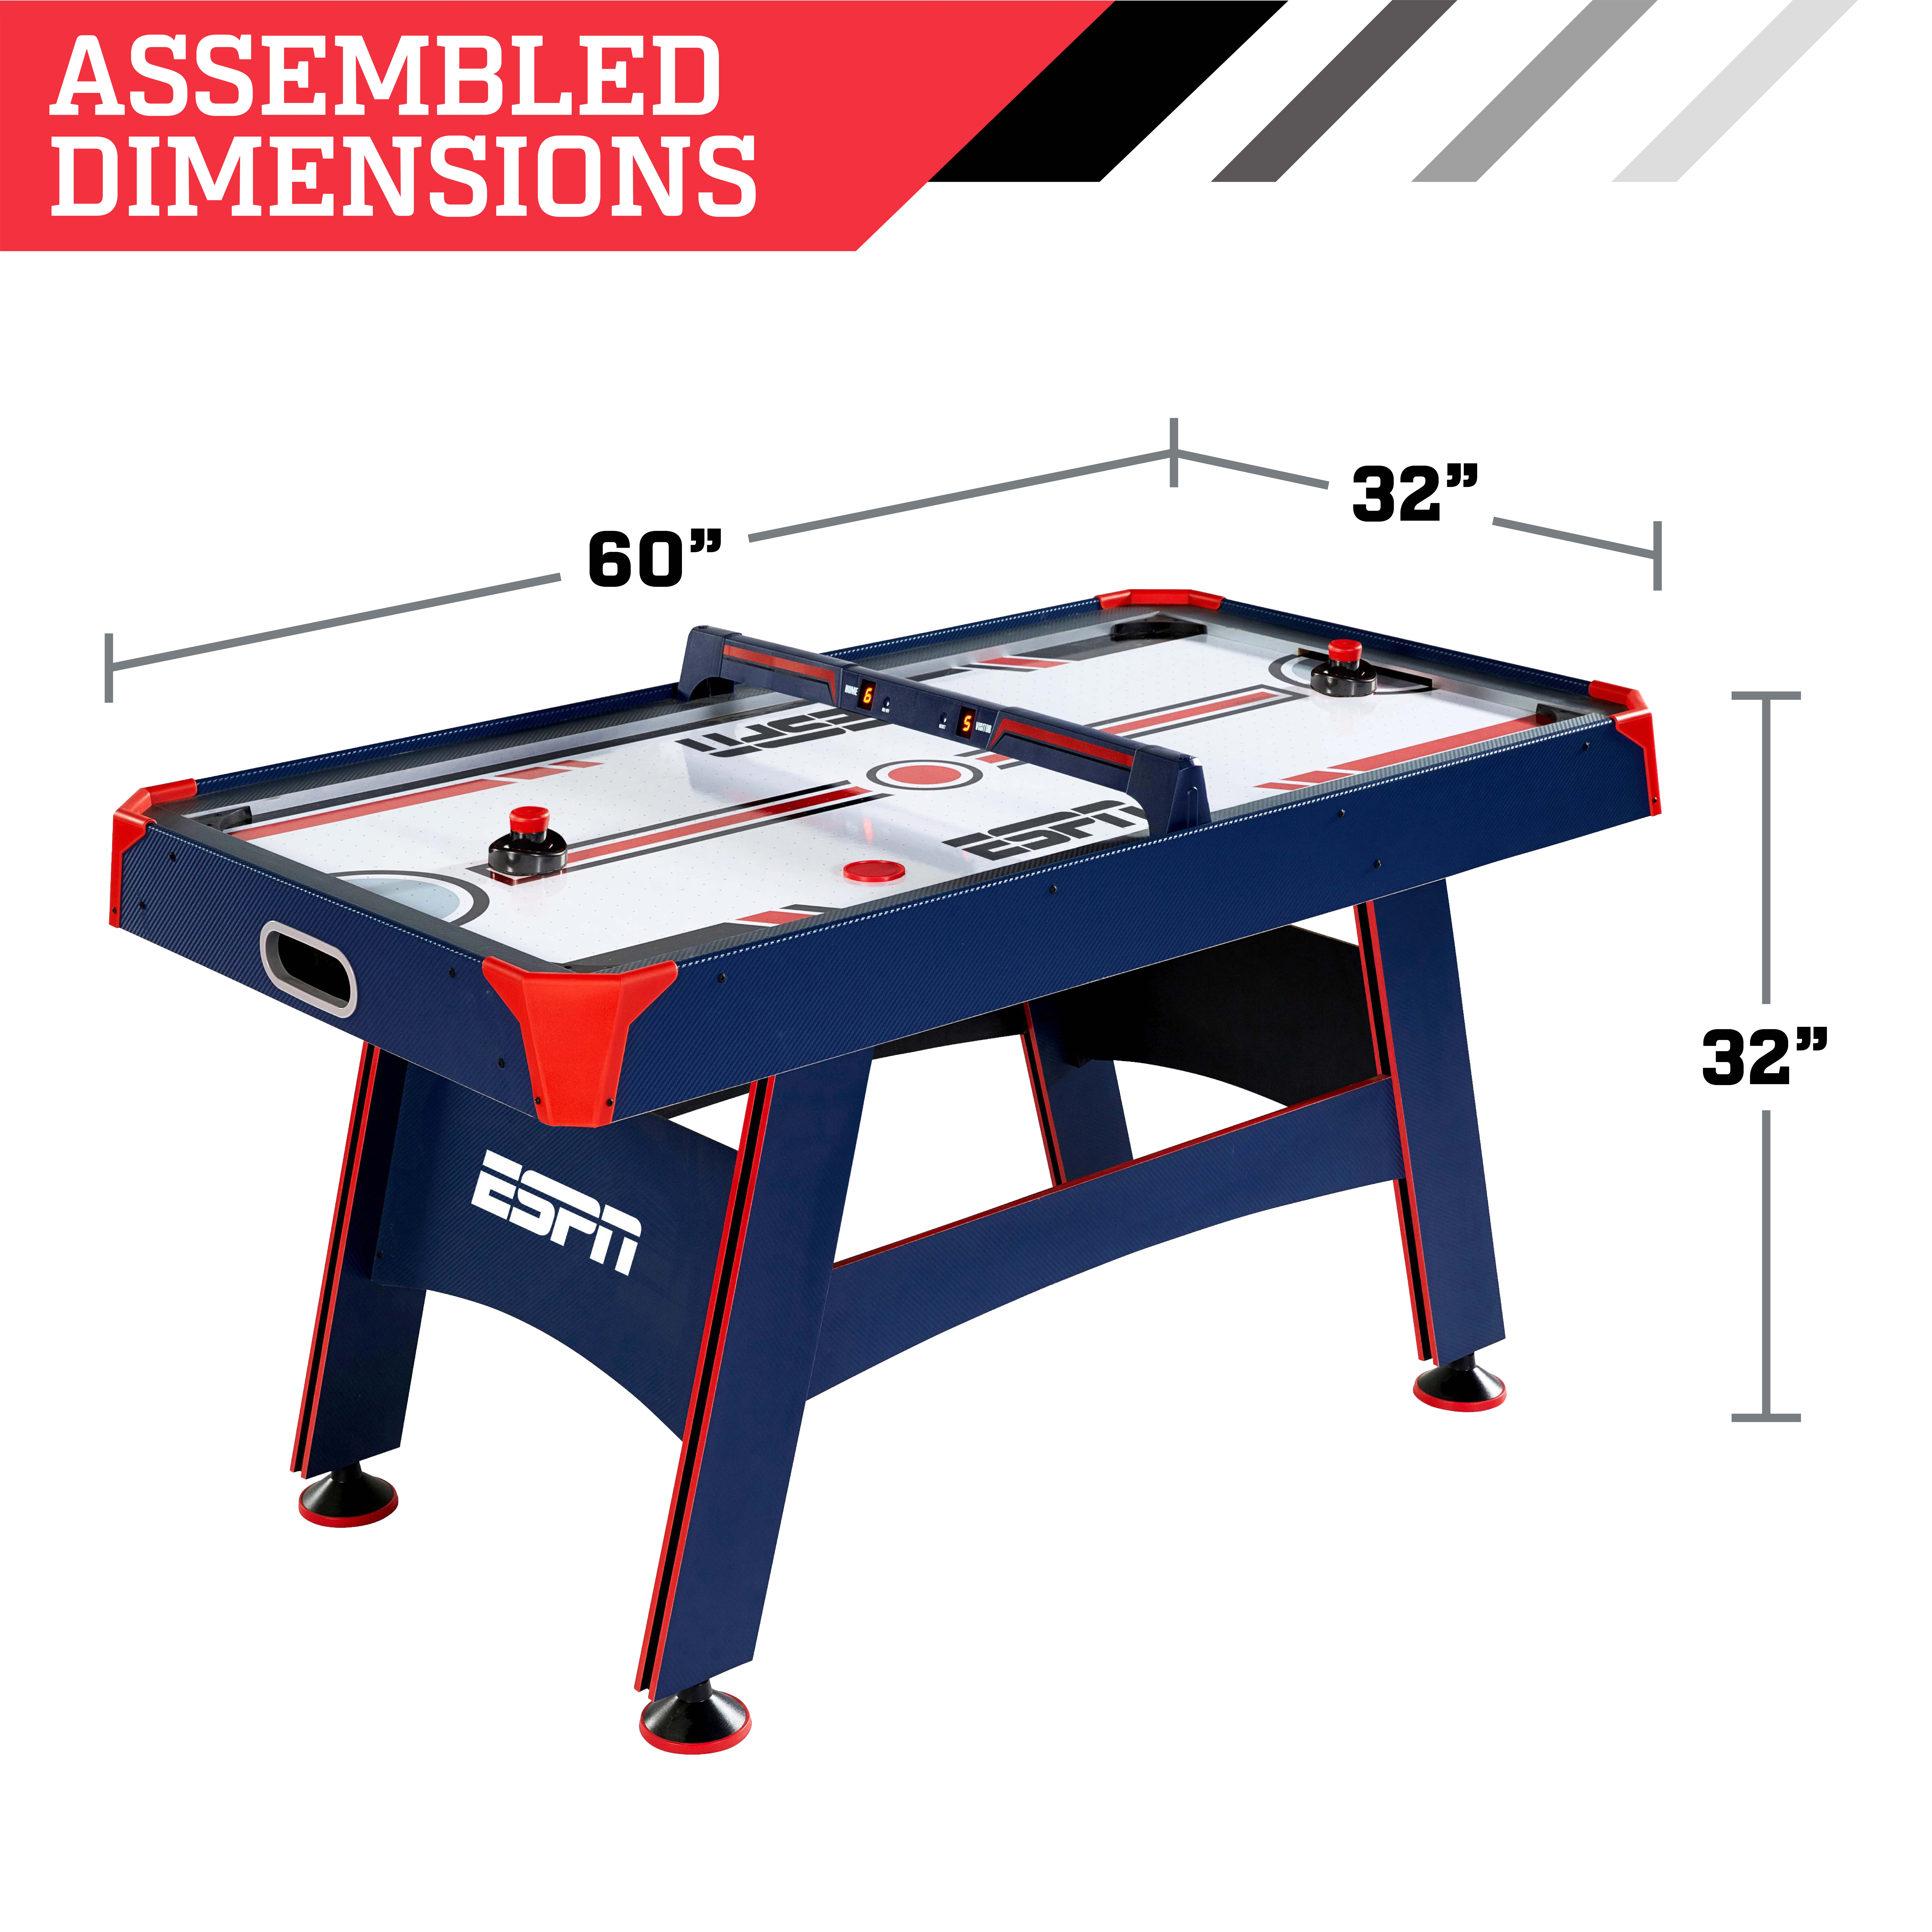 ESPN Air Powered Hockey Table with Overhead Electronic Scorer, 60" x 32" x 32" - image 5 of 11